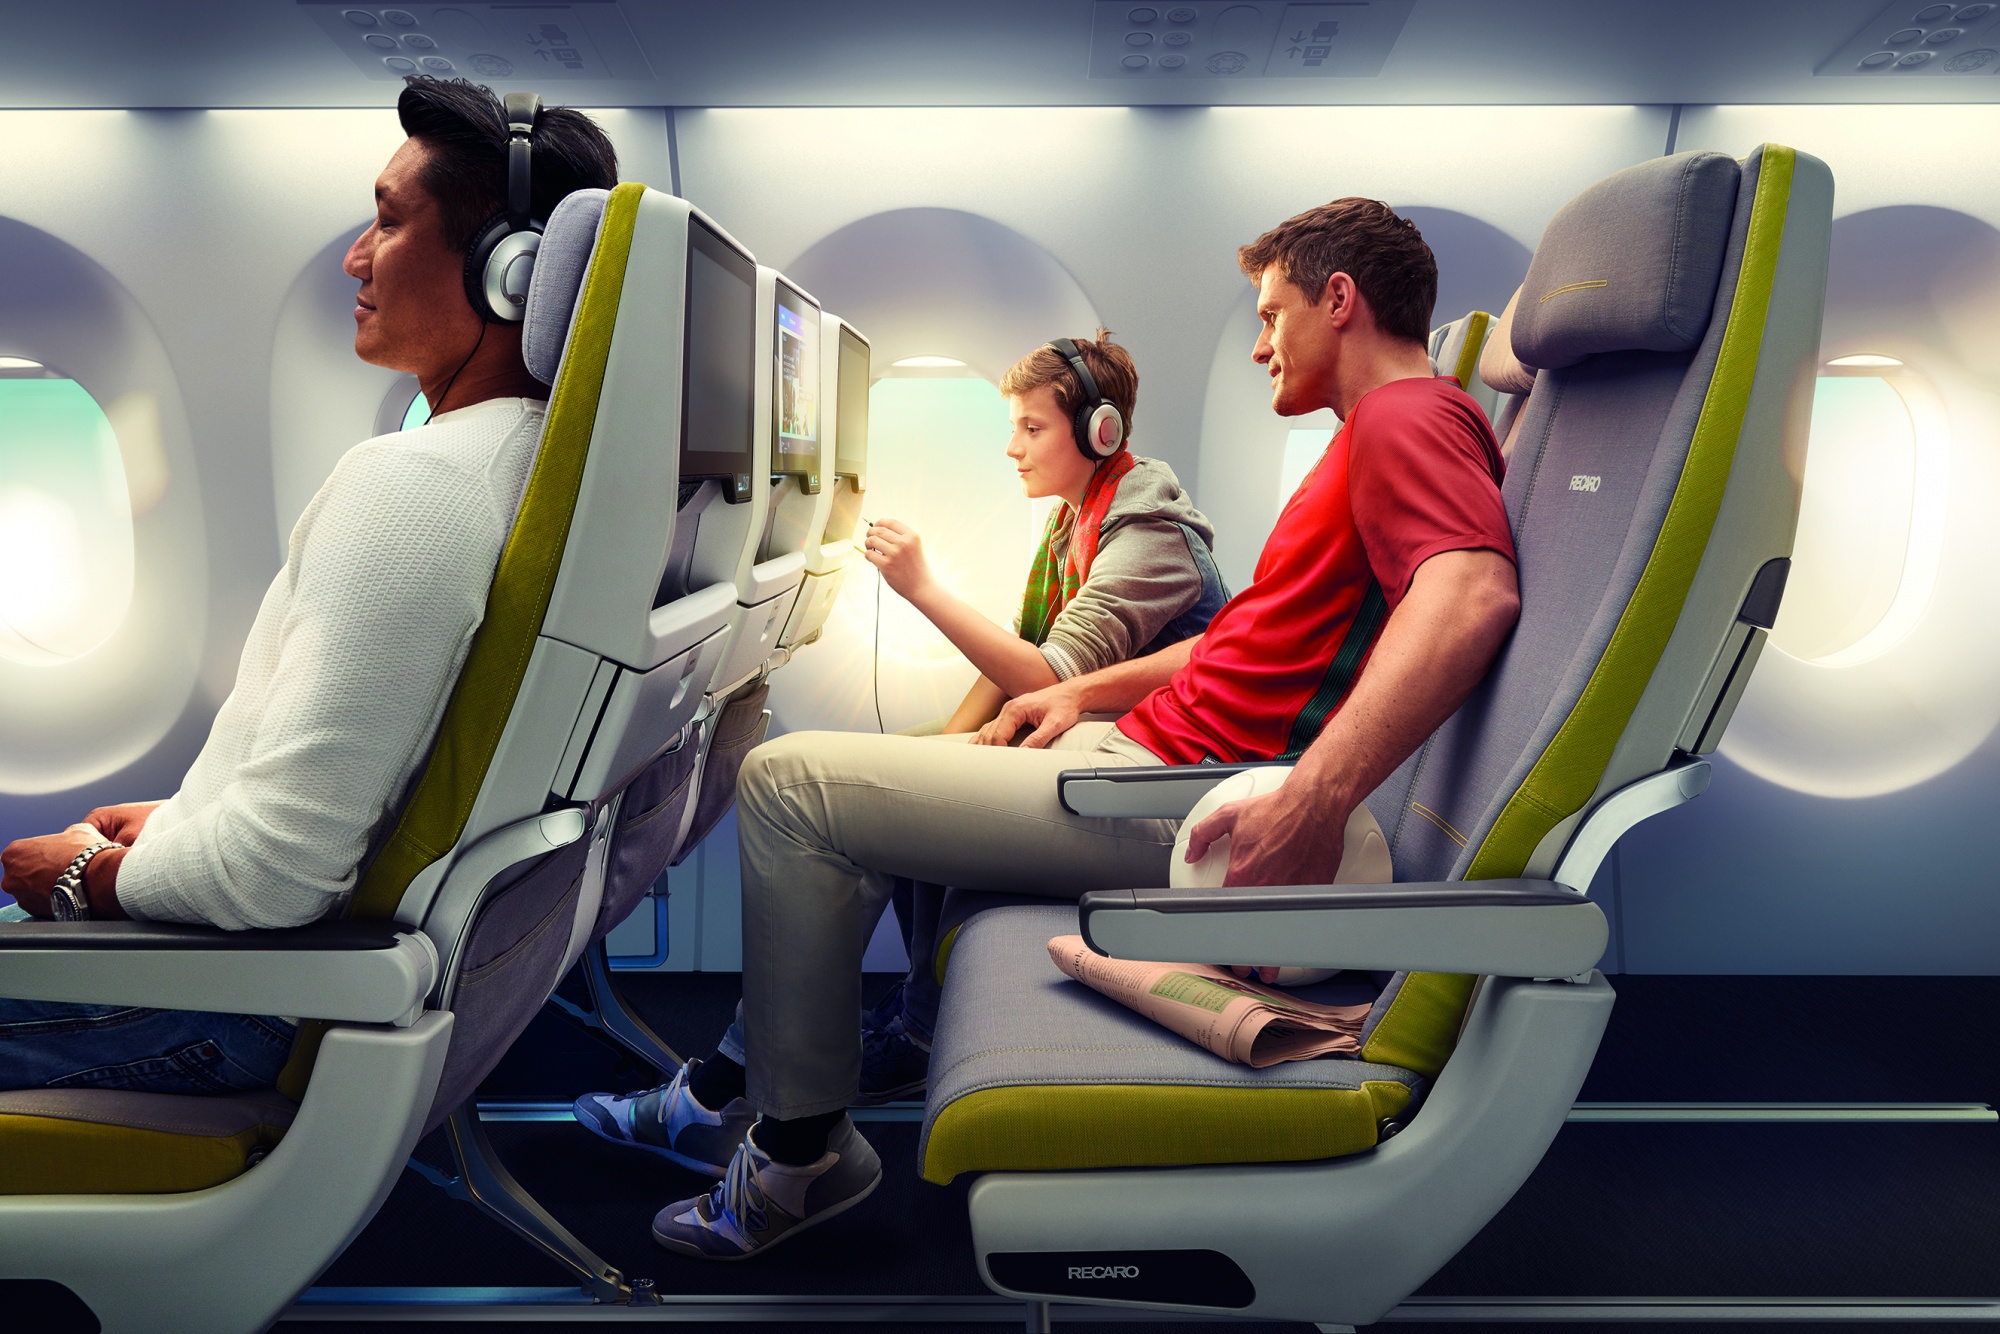 Recaro Aircraft Seating GmbH is developing a seat infused with a disinfecta...